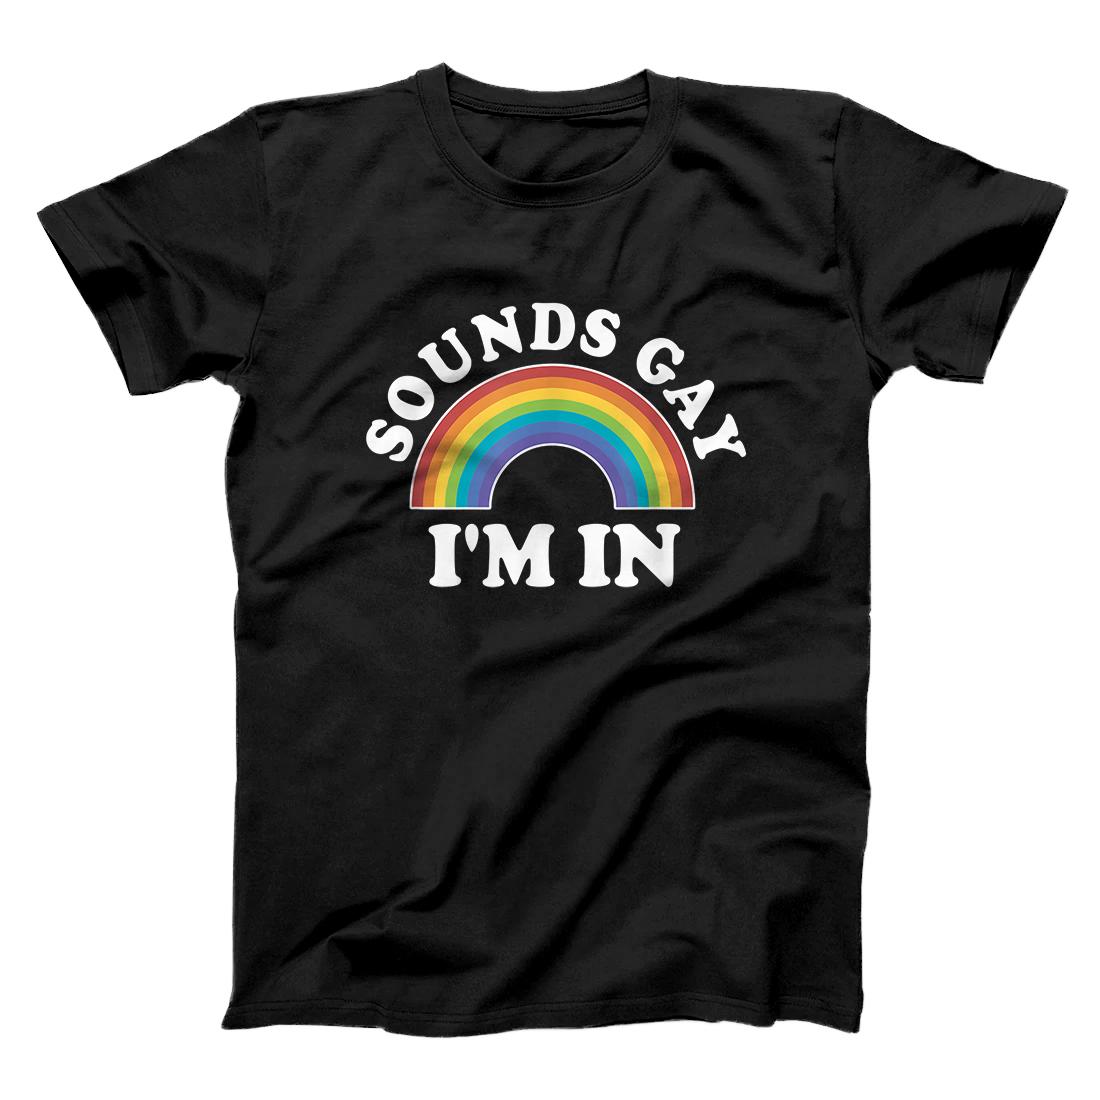 Personalized Gay Pride Shirts Men Women LGBT Rainbow Sounds Gay I'm In T-Shirt